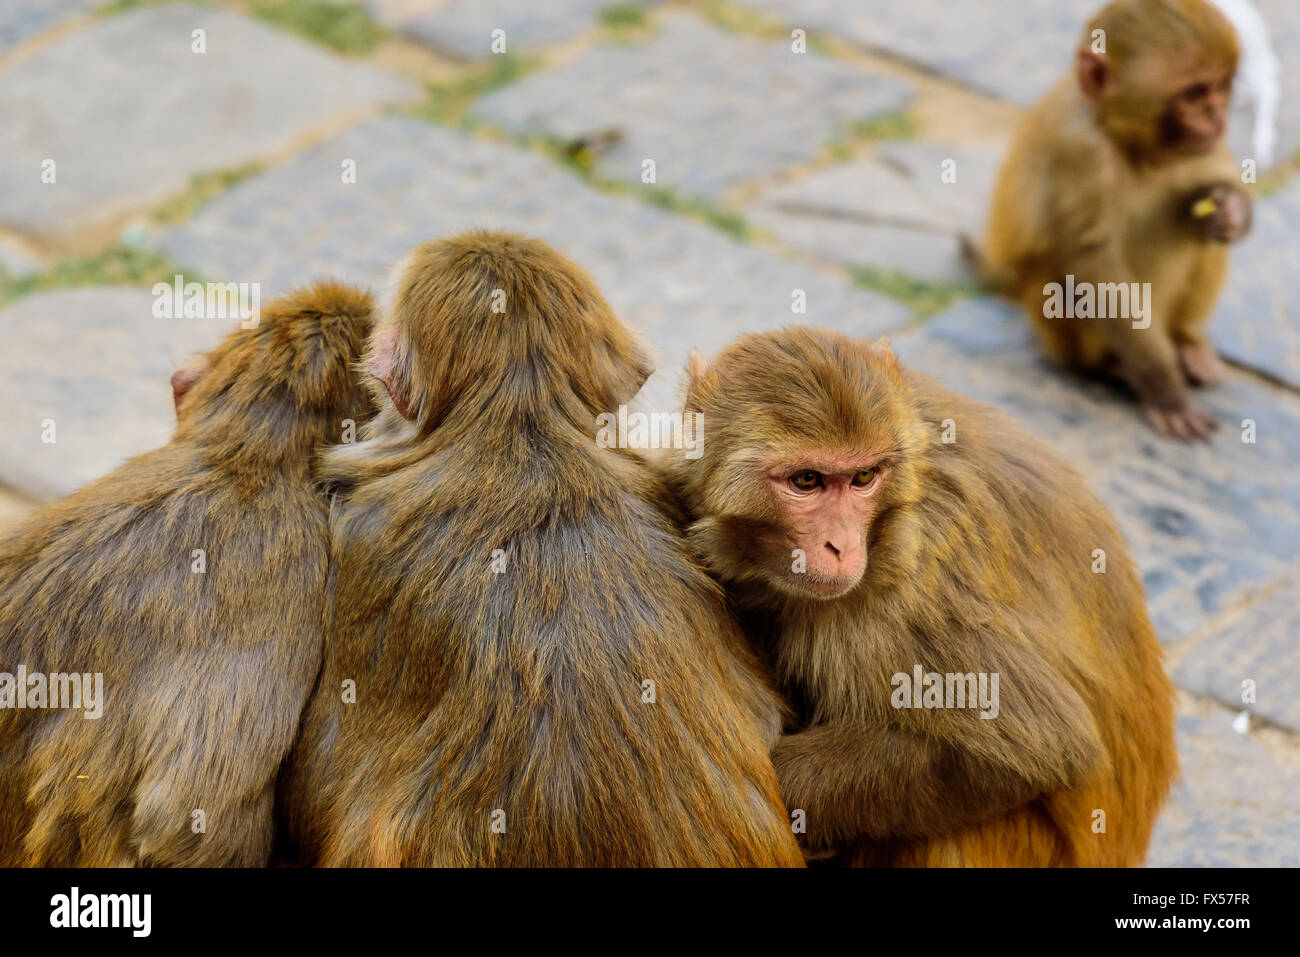 Group of monkeys huddle together as a young monkey sits far off Stock Photo